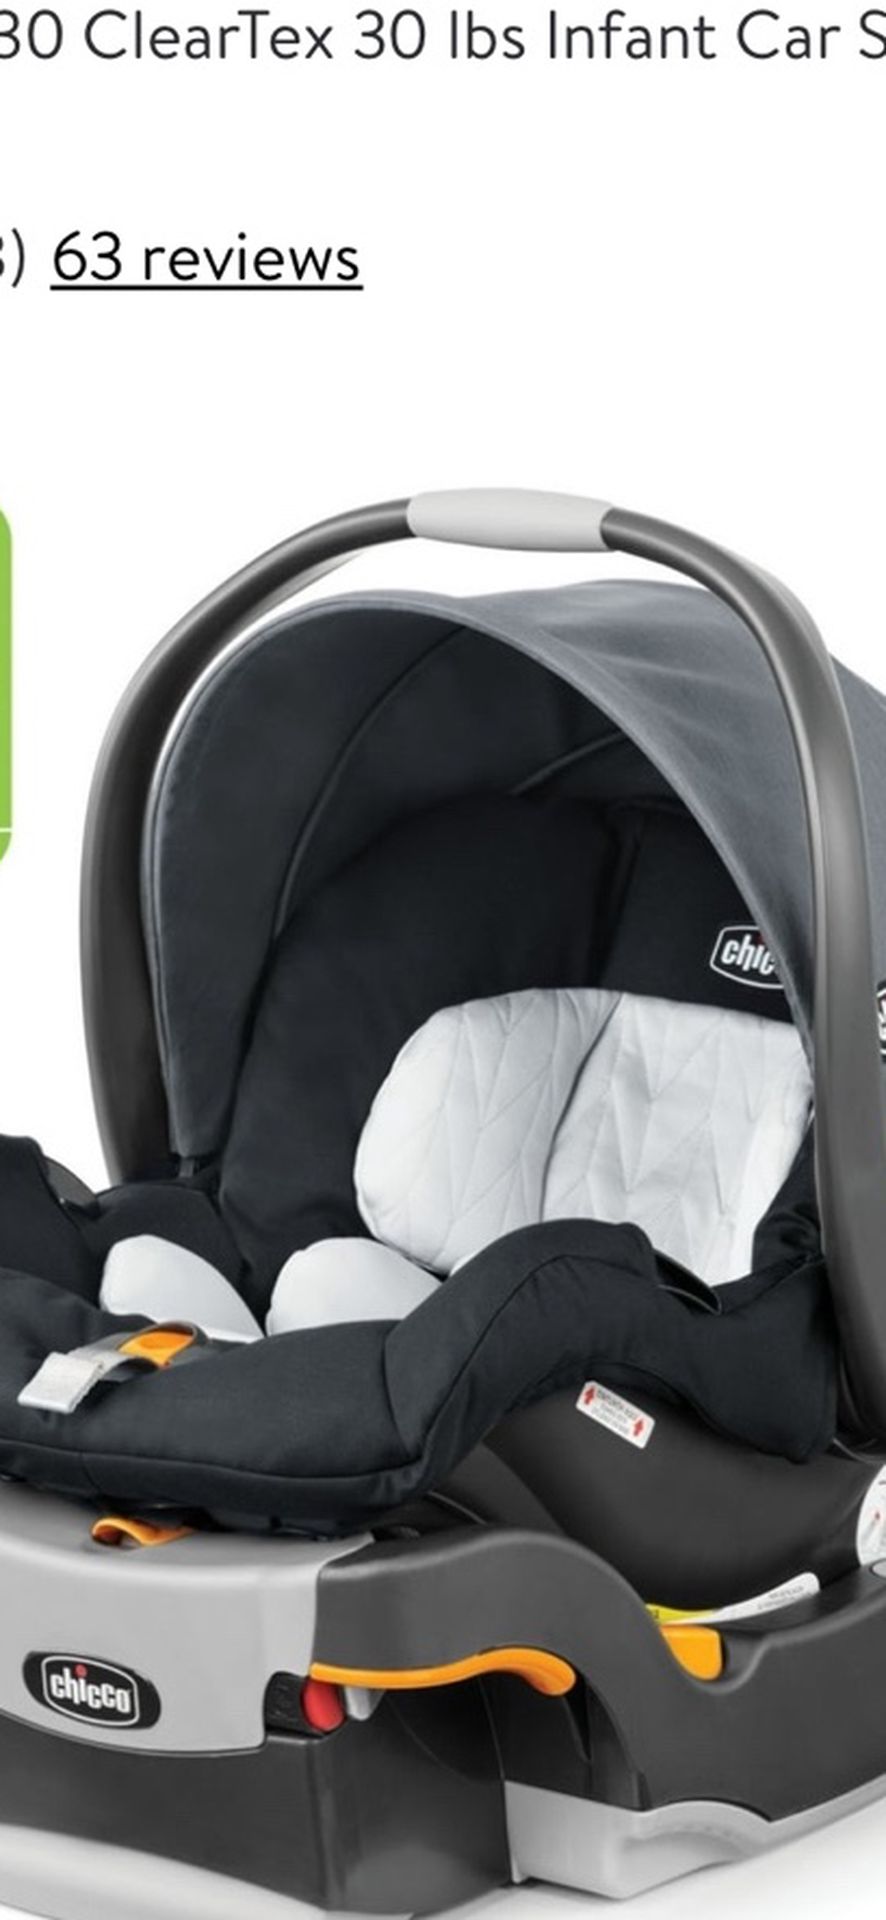 Chicco KeyFit 30 ClearTex 30 lbs Infant Car Seat - Pewter (Grey)